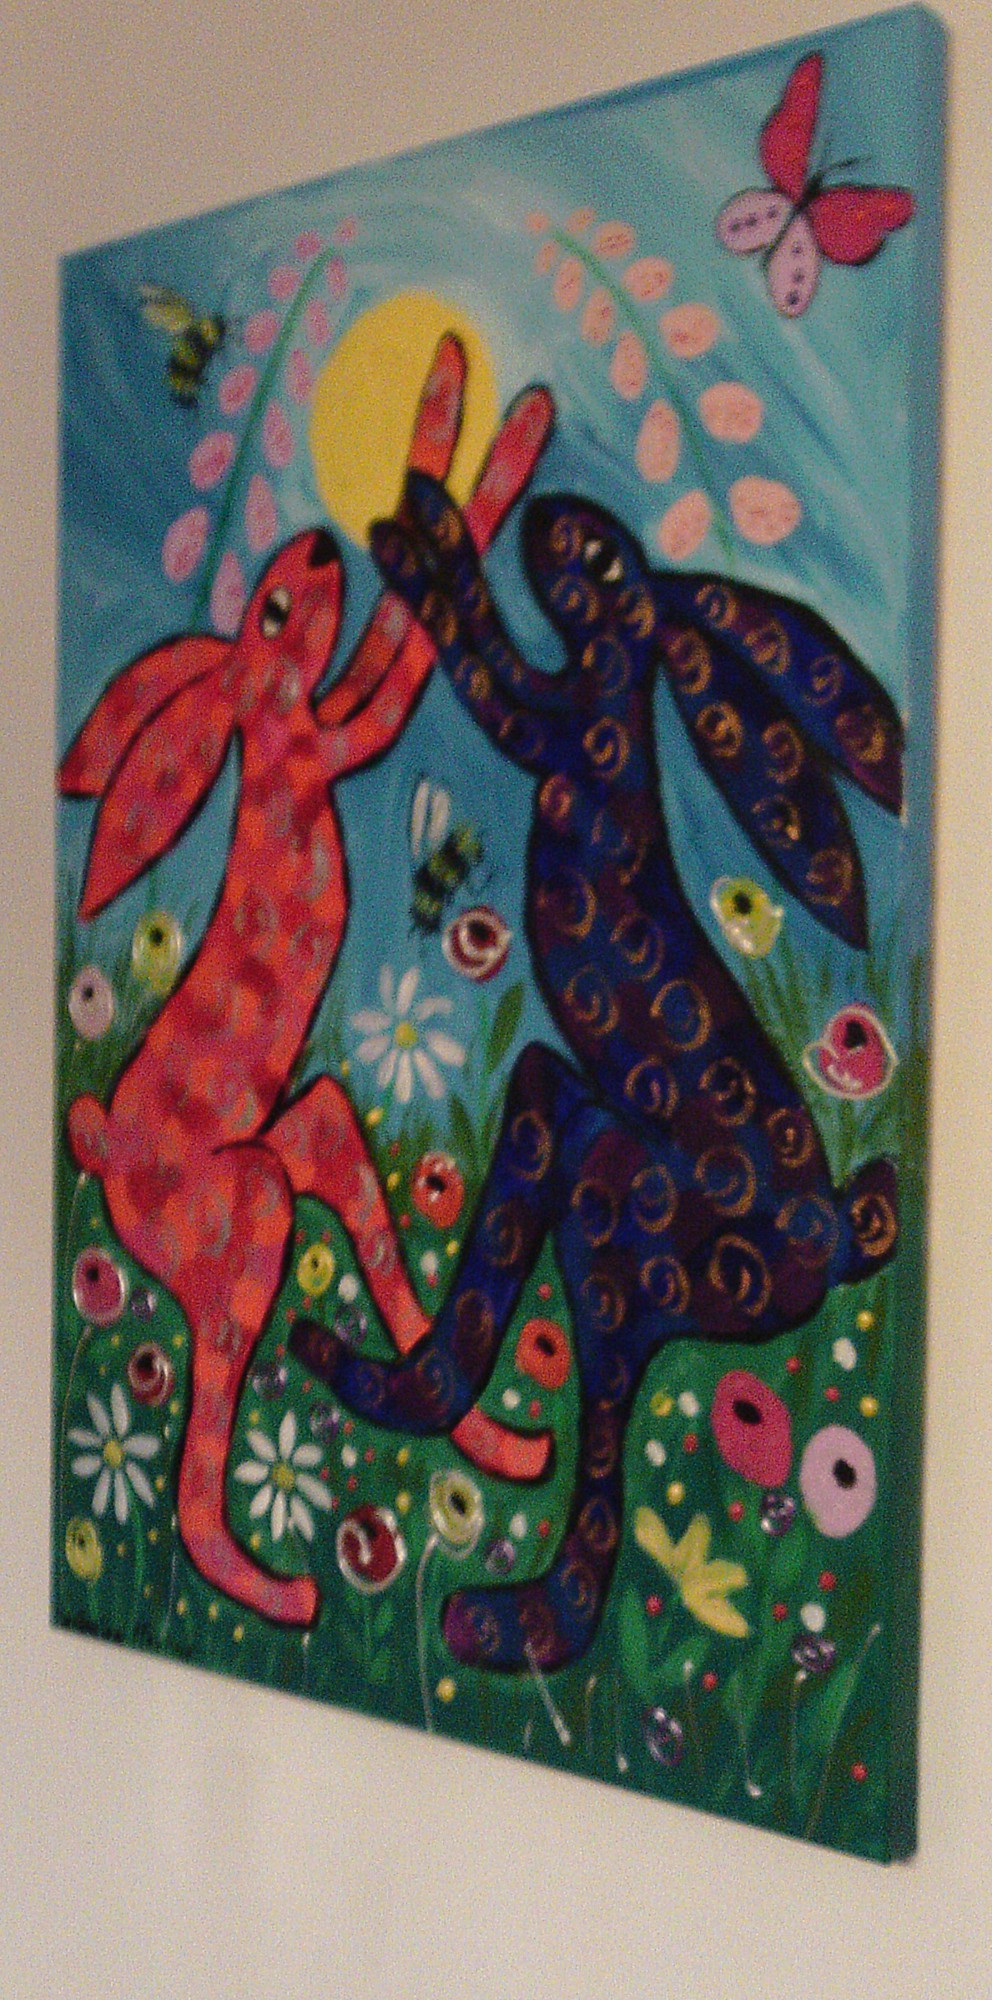 Quirky Hares Dancing among flowers